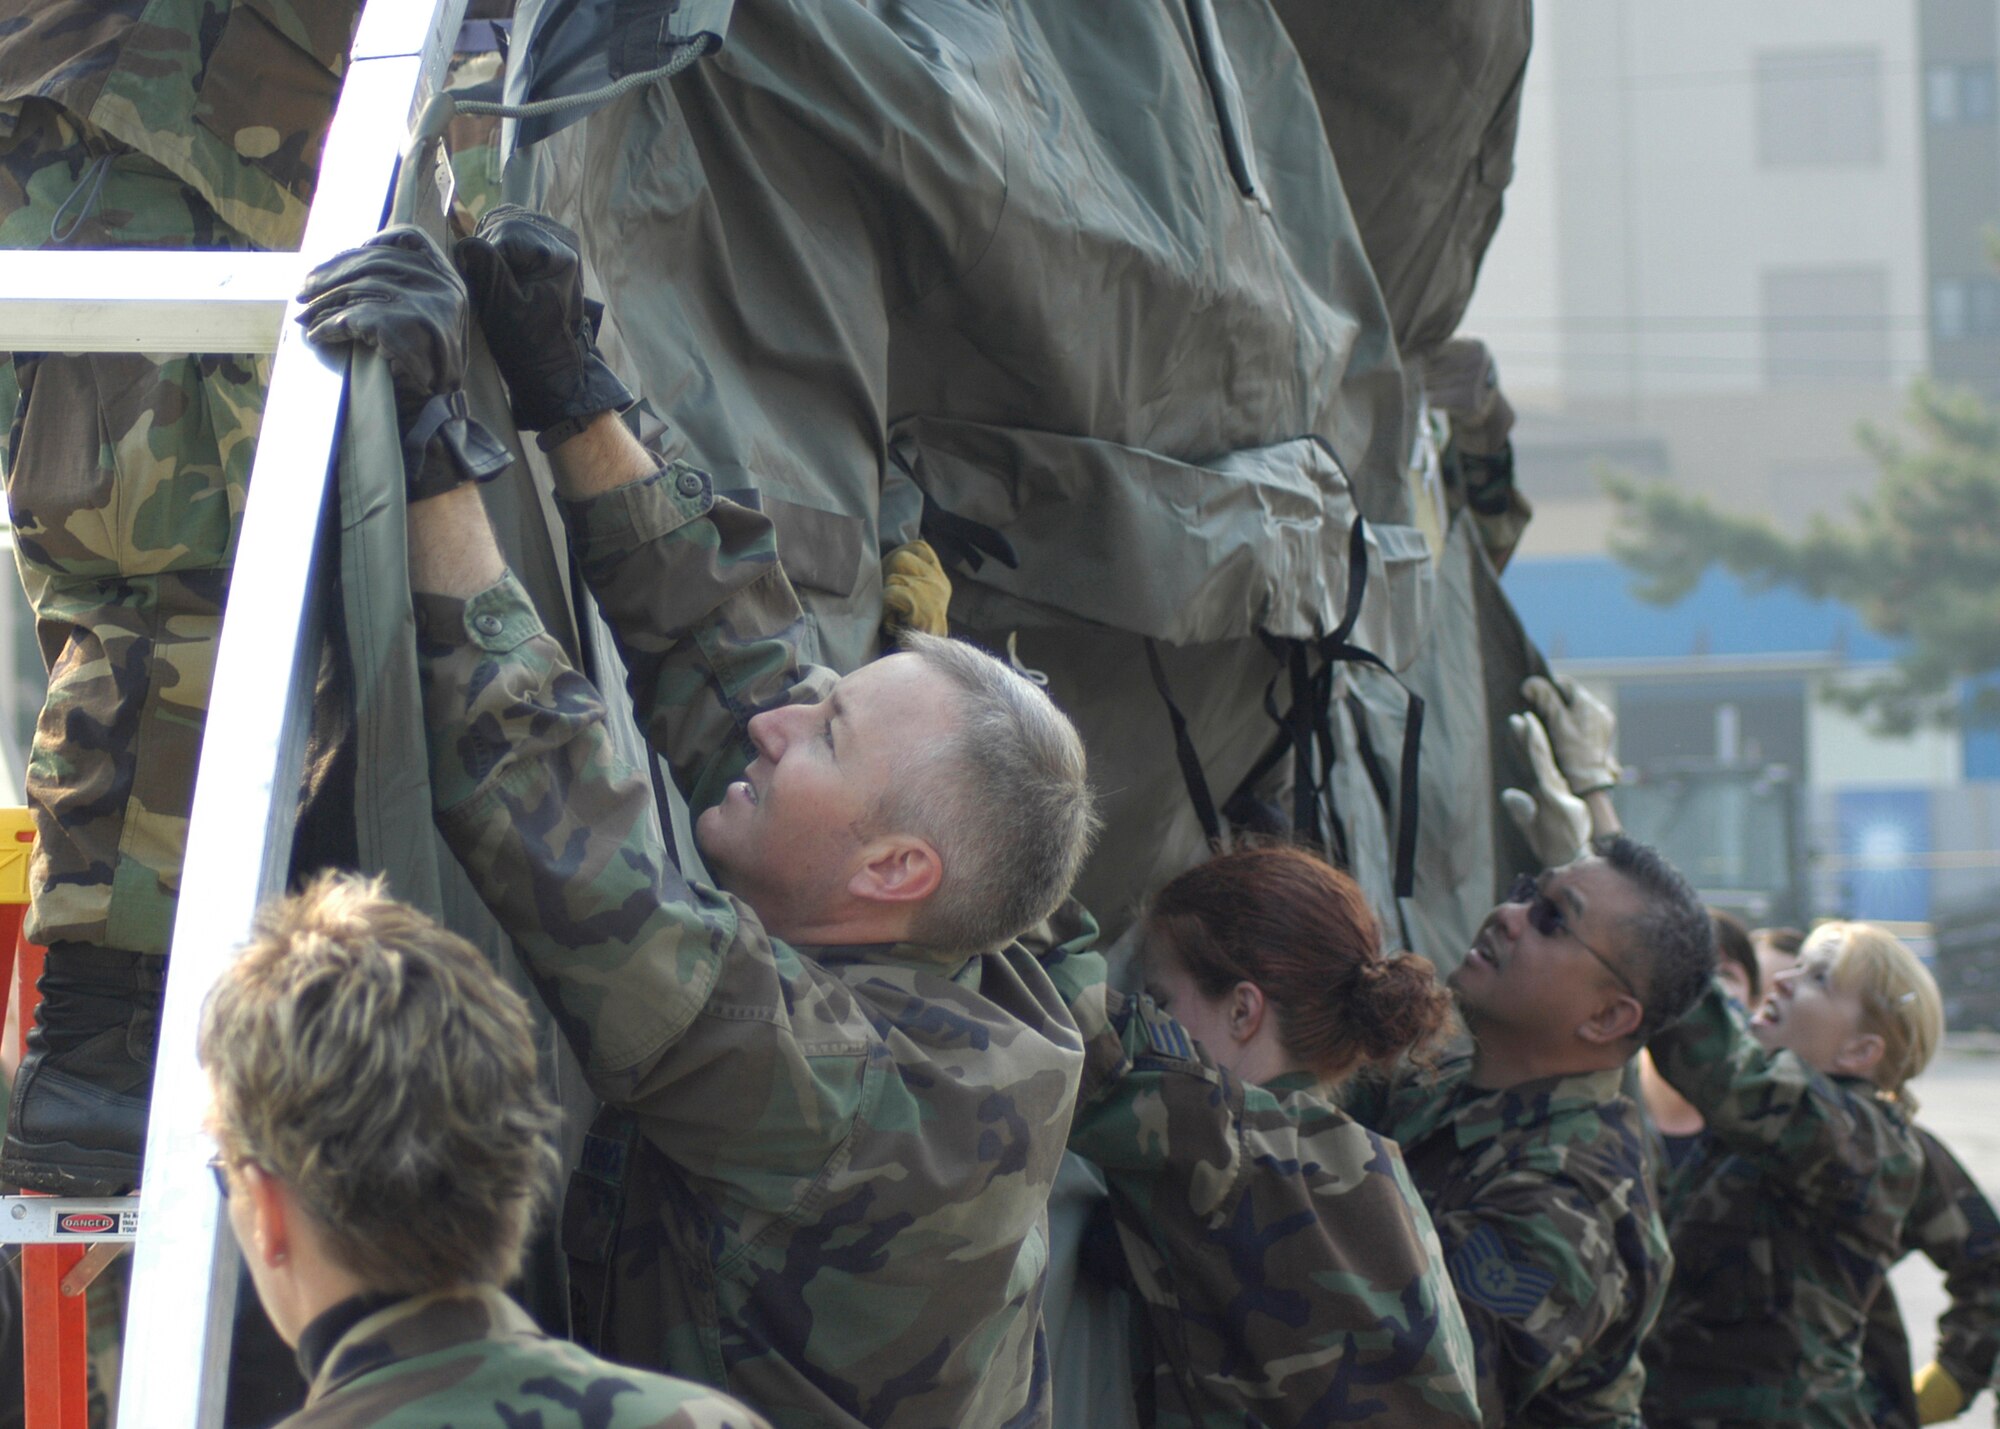 KUNSAN AIR BASE, South Korea-- Airmen from the 944th Medical Squadron, Air Force Reserve, place a front door tarp on the frame of a medical tent here Oct 23. Airmen from the 944th Medical Squadron and other Reservists from the 10th and 4th Air Forces are deployed to Kunsan AB to receive Expeditionary Medical System (EMEDS) training. (U.S. Air Force photo/Staff Sgt. Araceli Alarcon)                                